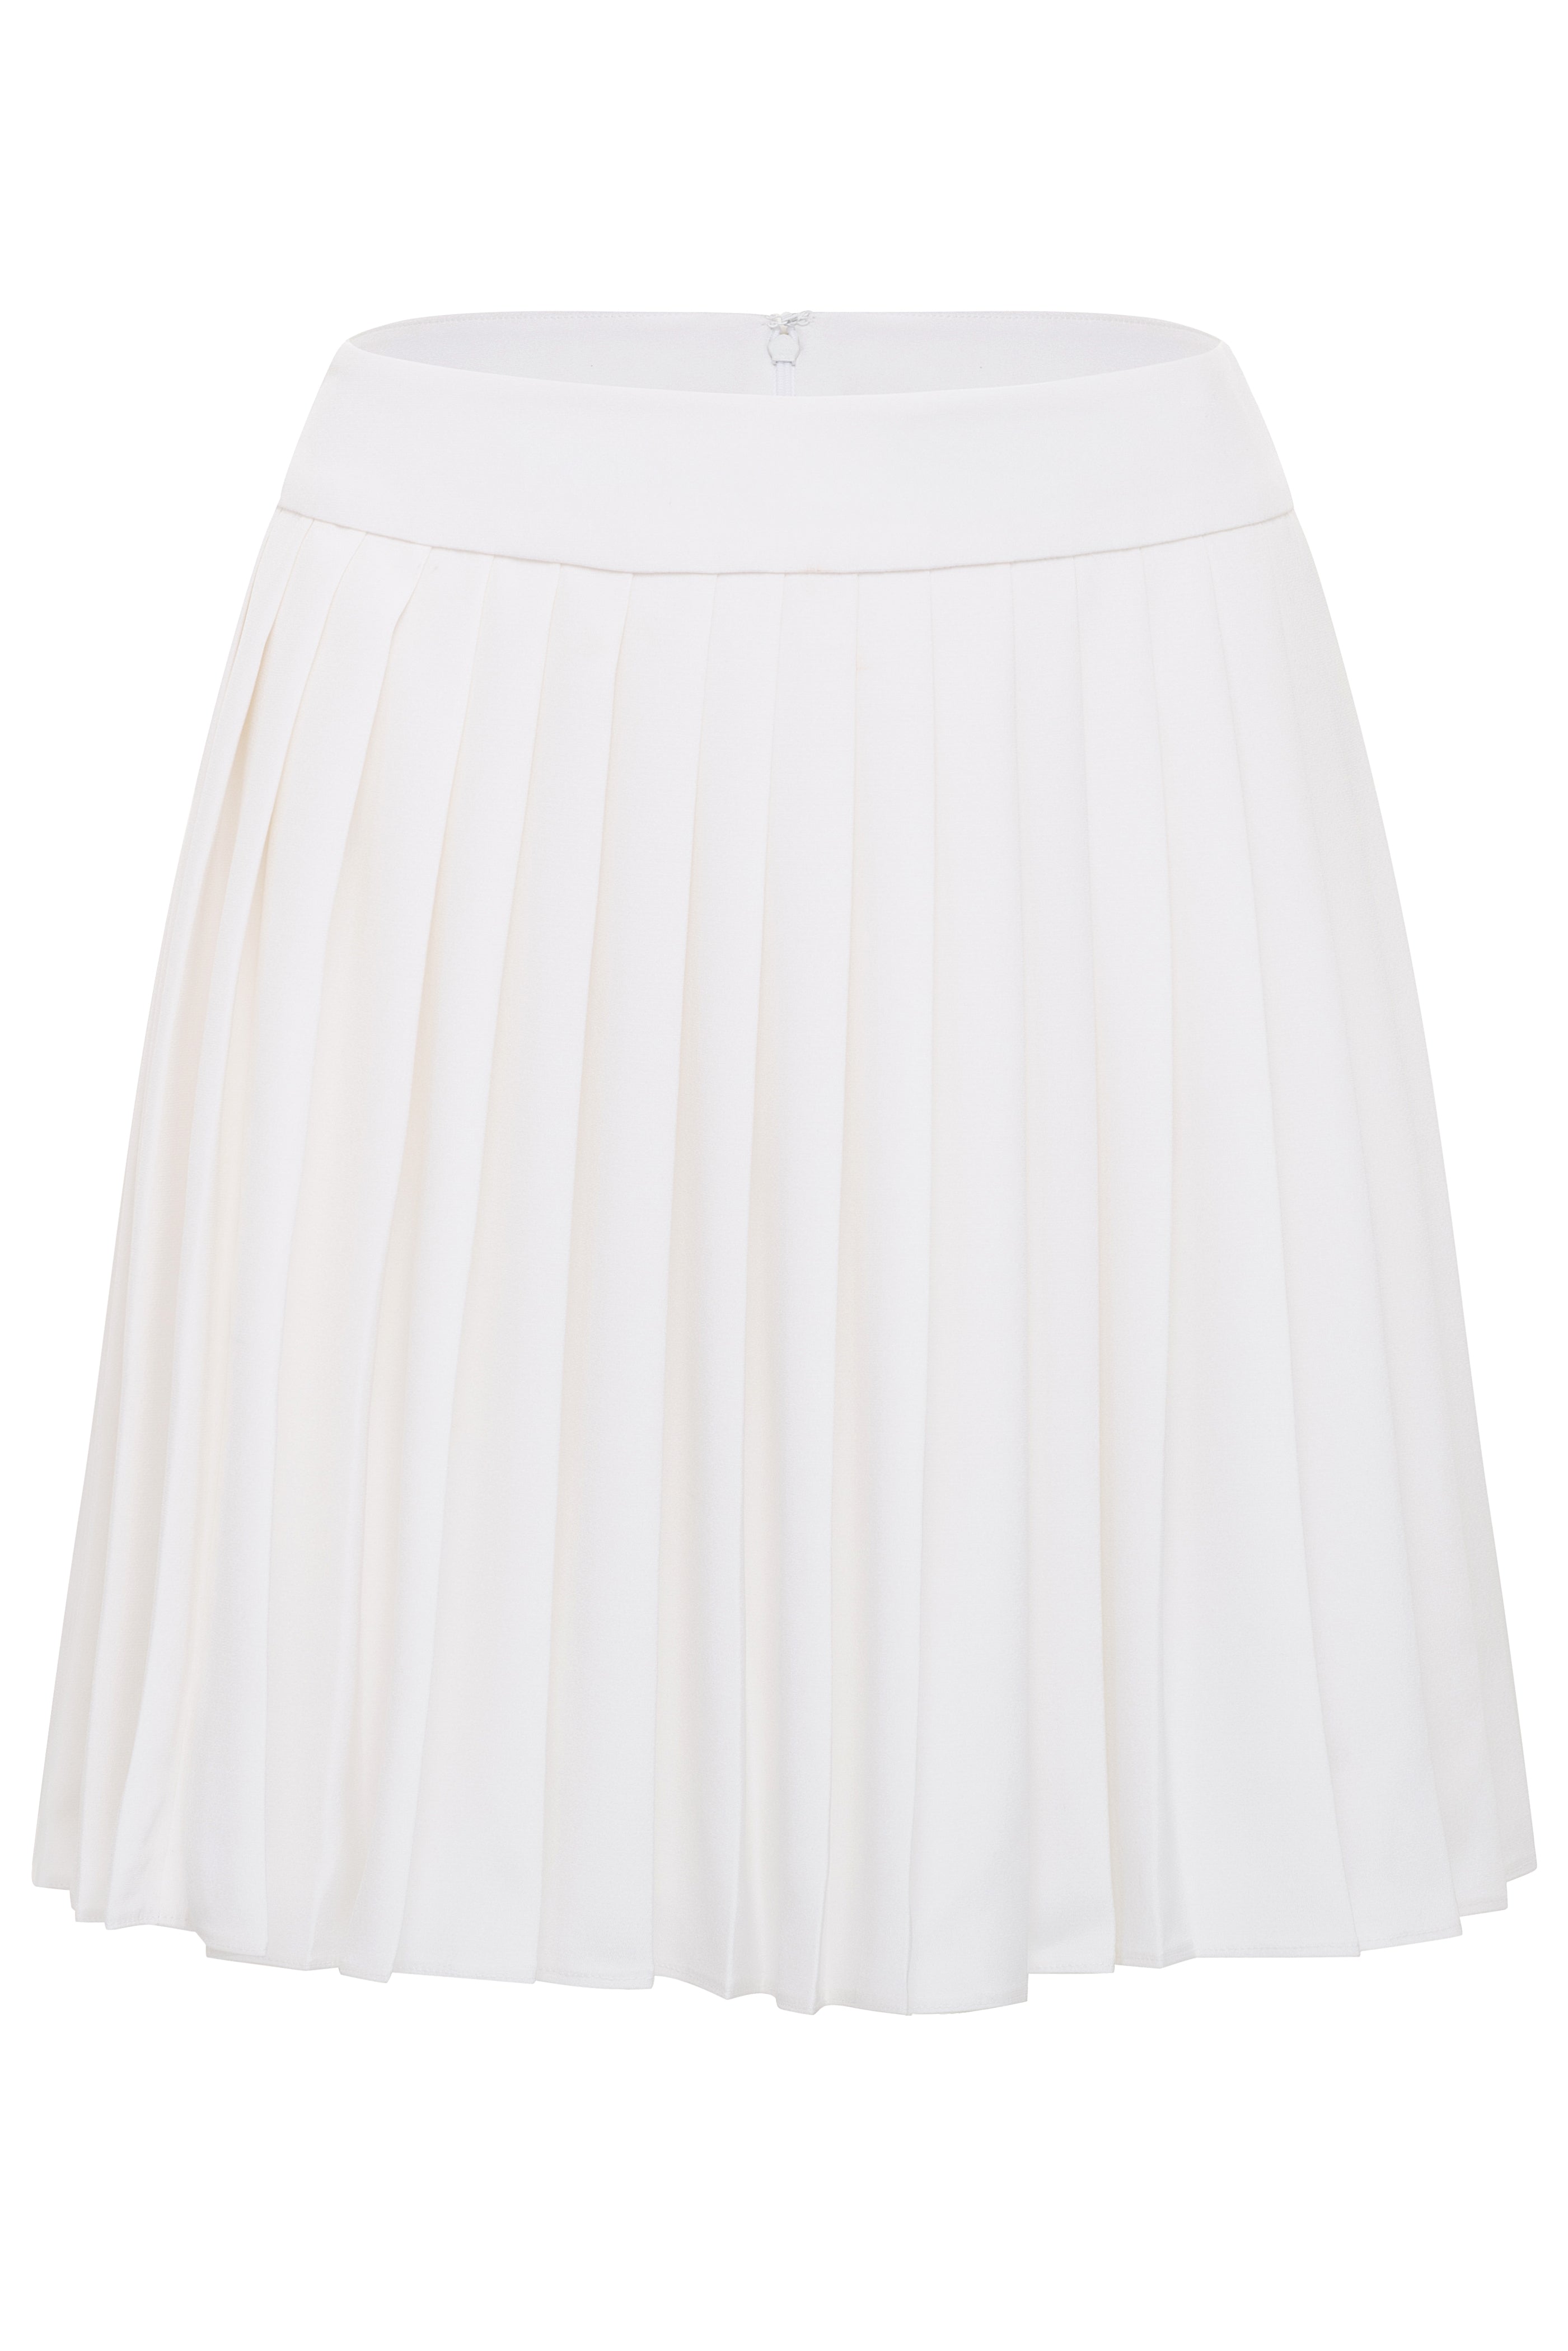 Shop Alexis Silk Pleated Mini Skirt - Classic Chic – Fifth & Welshire®